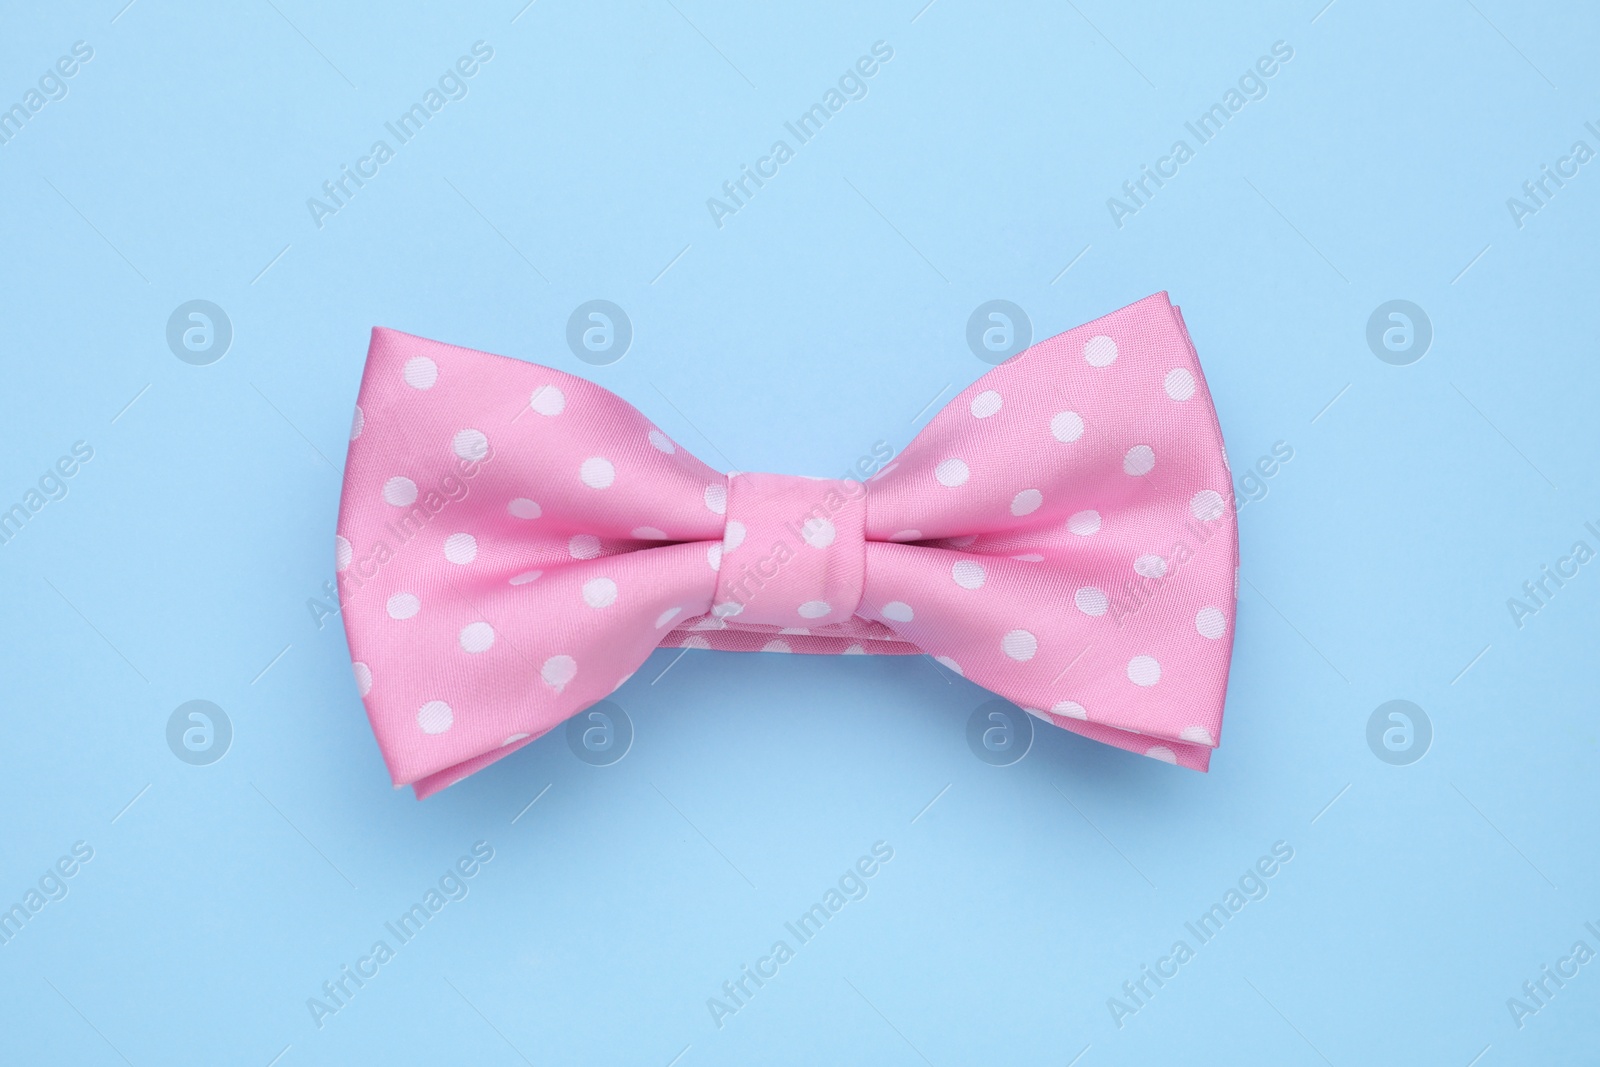 Photo of Stylish pink bow tie with polka dot pattern on light blue background, top view